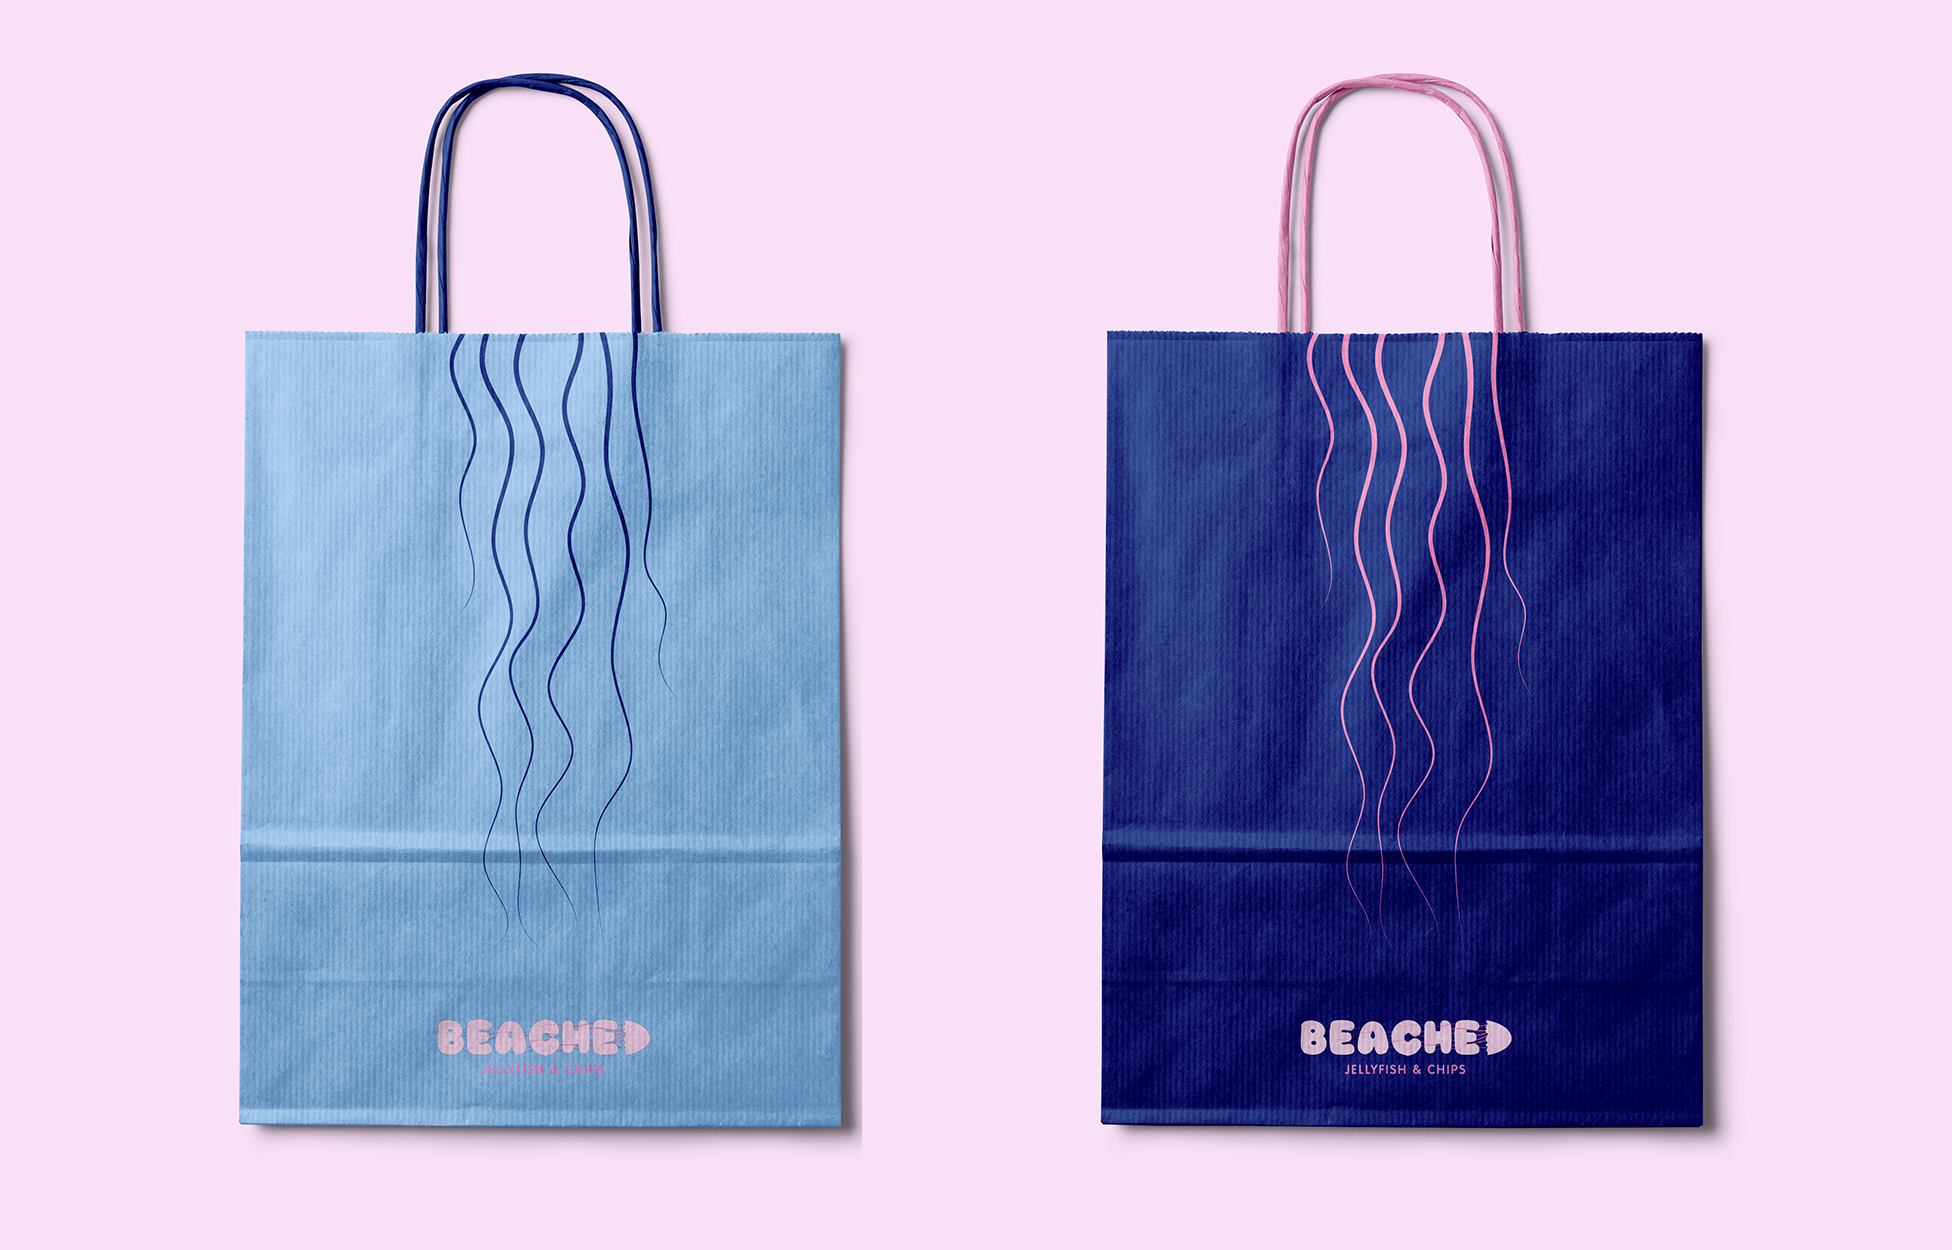 The blue paper takeaway bag incorporates the jellyfish by showing tenticle lines below handle making handle look like body of the jellyfish. Brand name at bottom of bag.